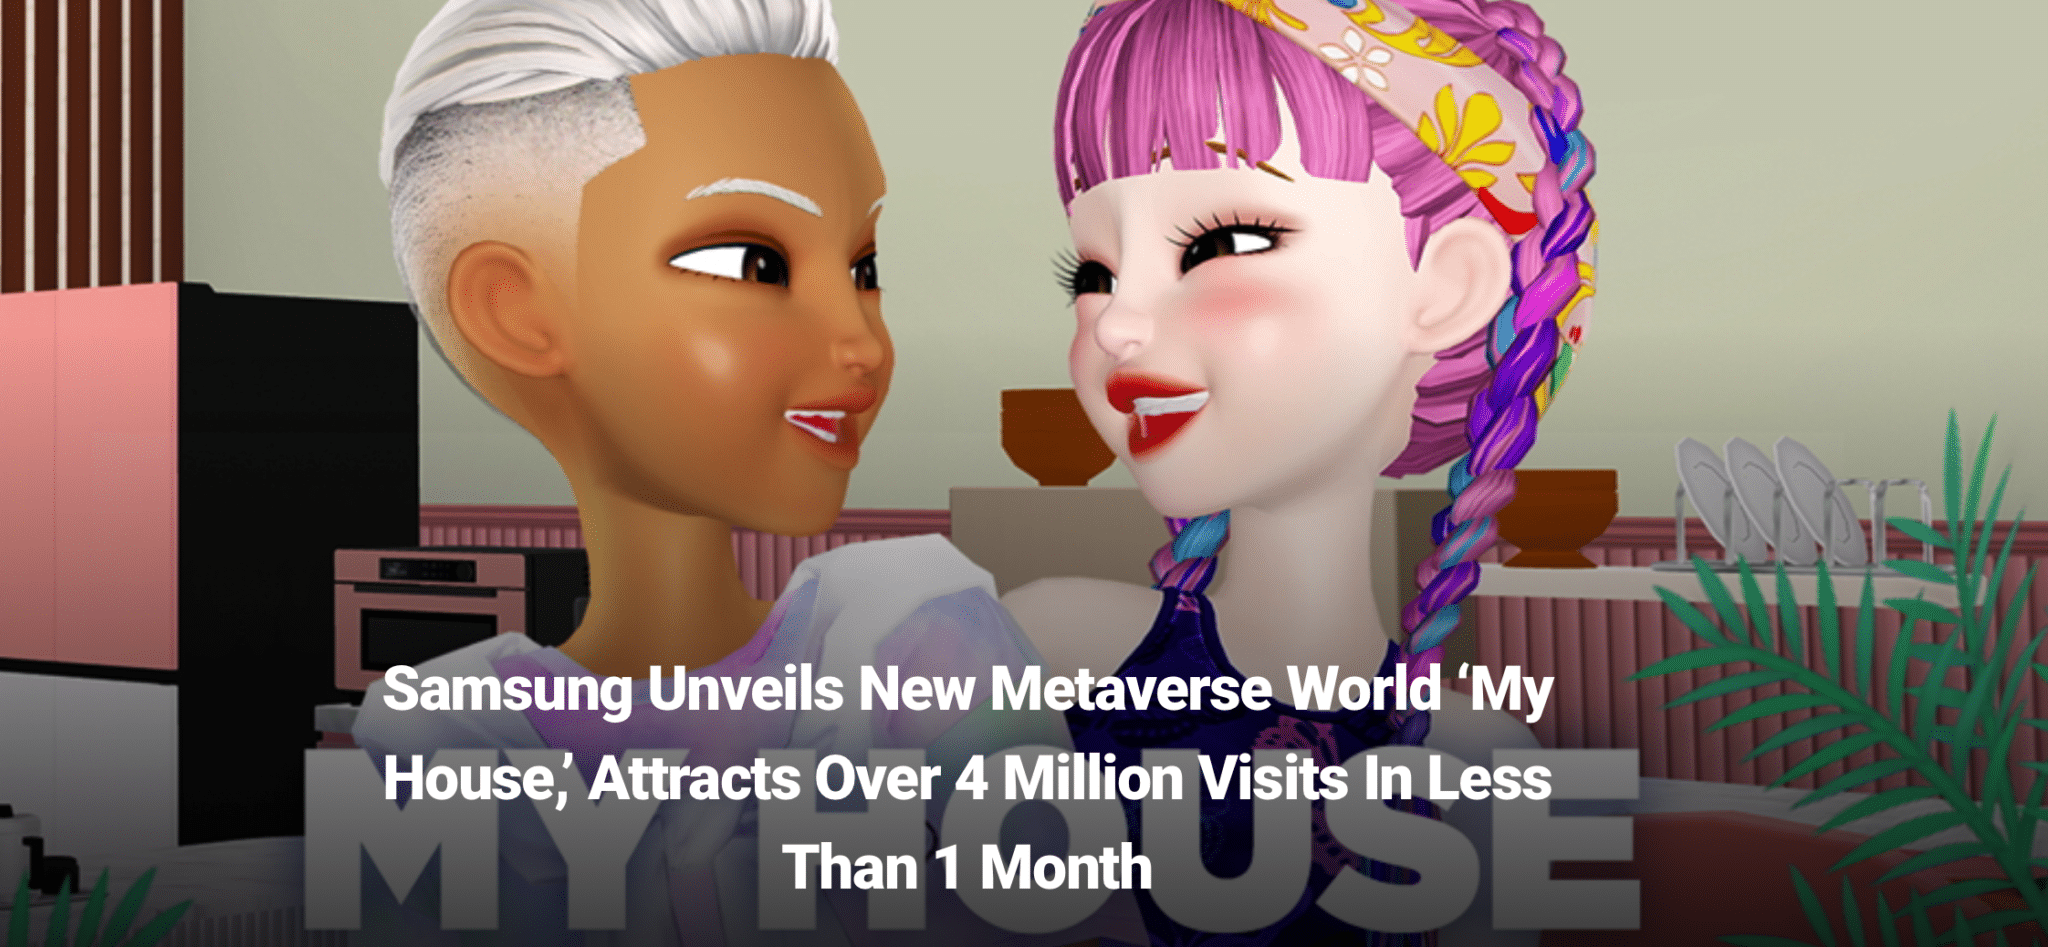 New Samsung Metaverse World - Attracts Over 4 Million Visits In Less Than a Month